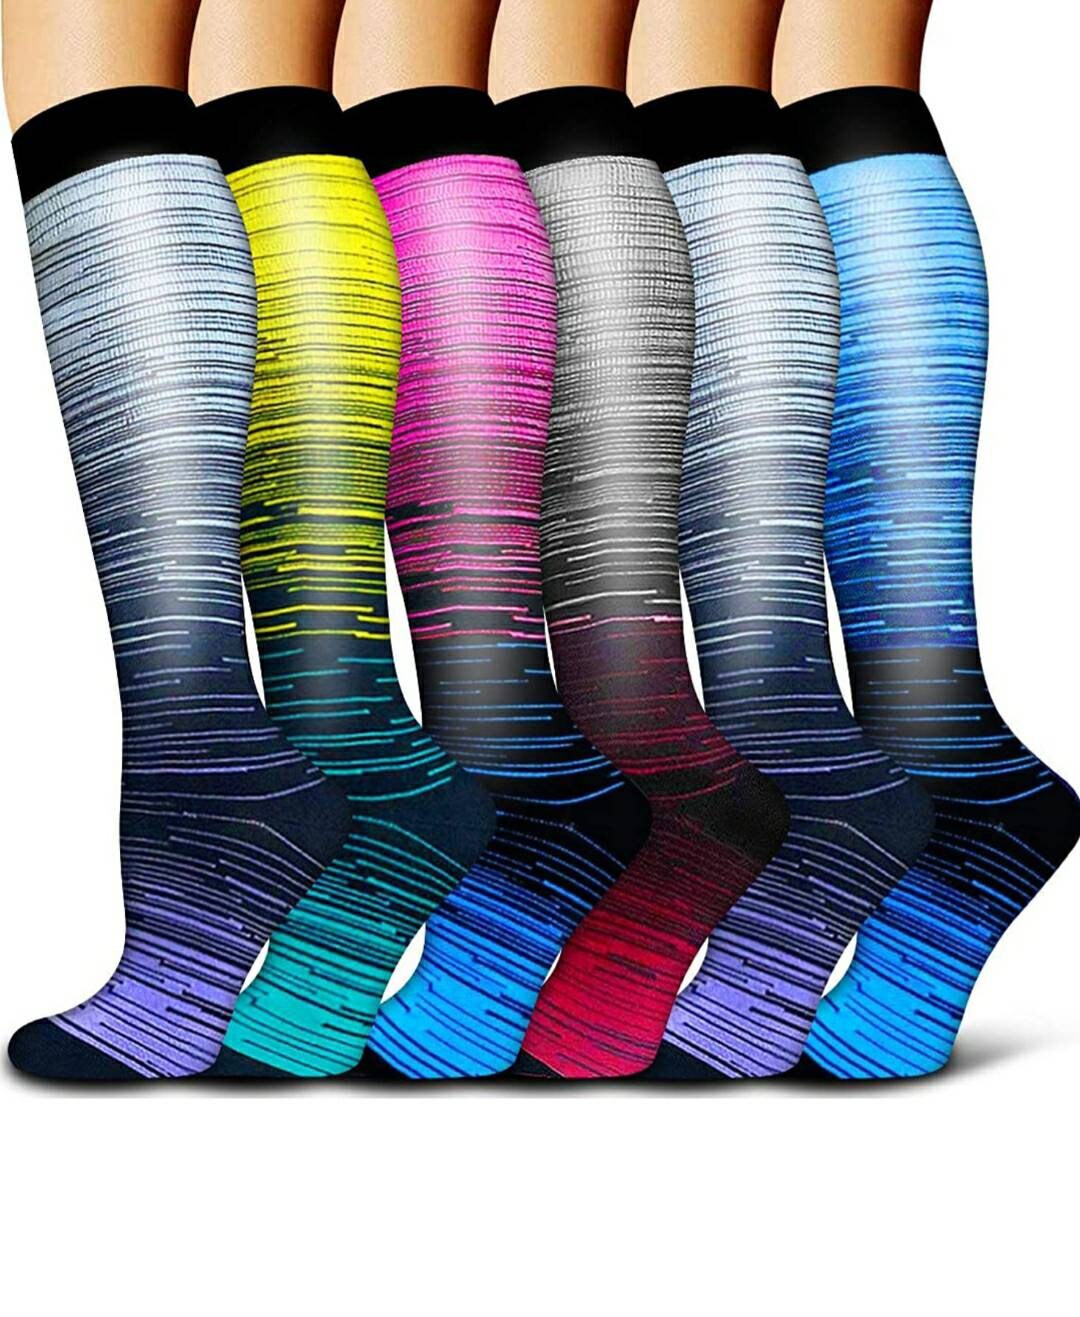 Fun Designs Compression Socks for Healthcare Workers - Etsy